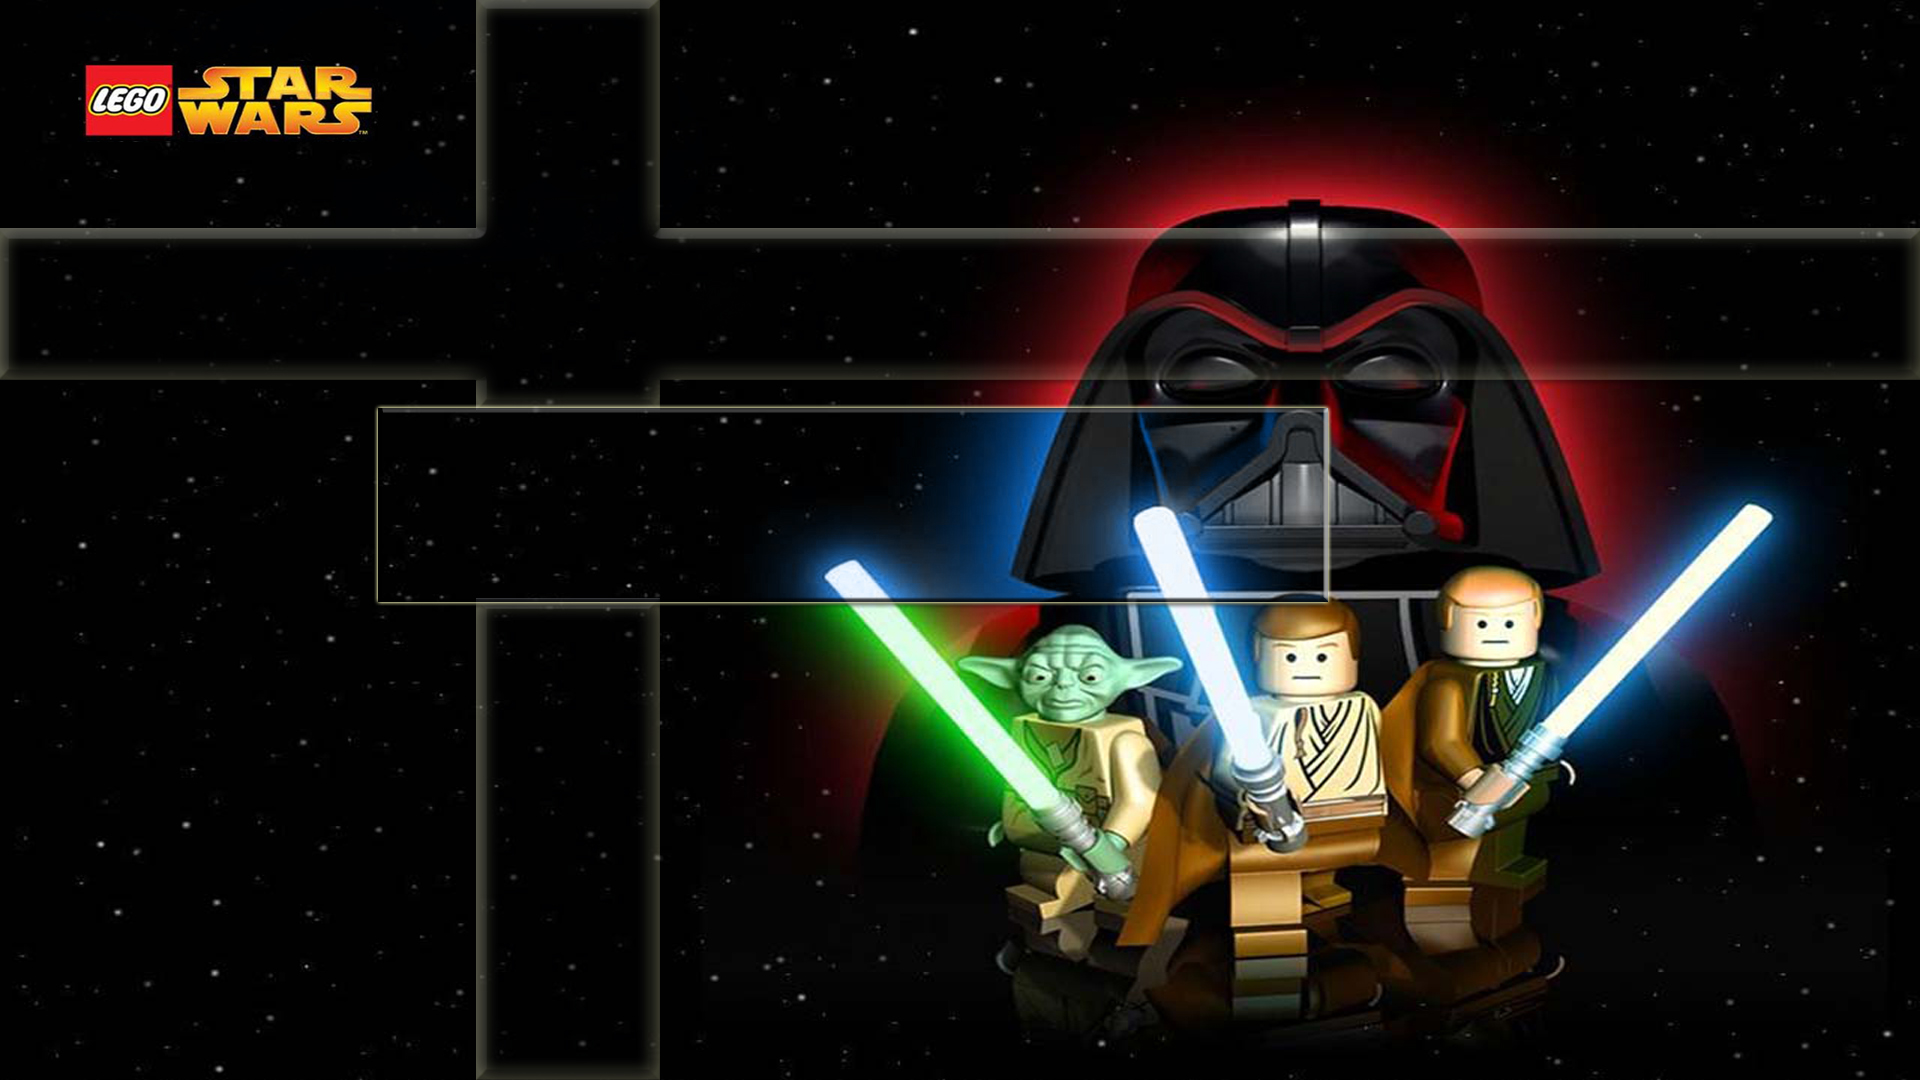 This is a Lego Star Wars wallpaper This Lego Star Wars background can